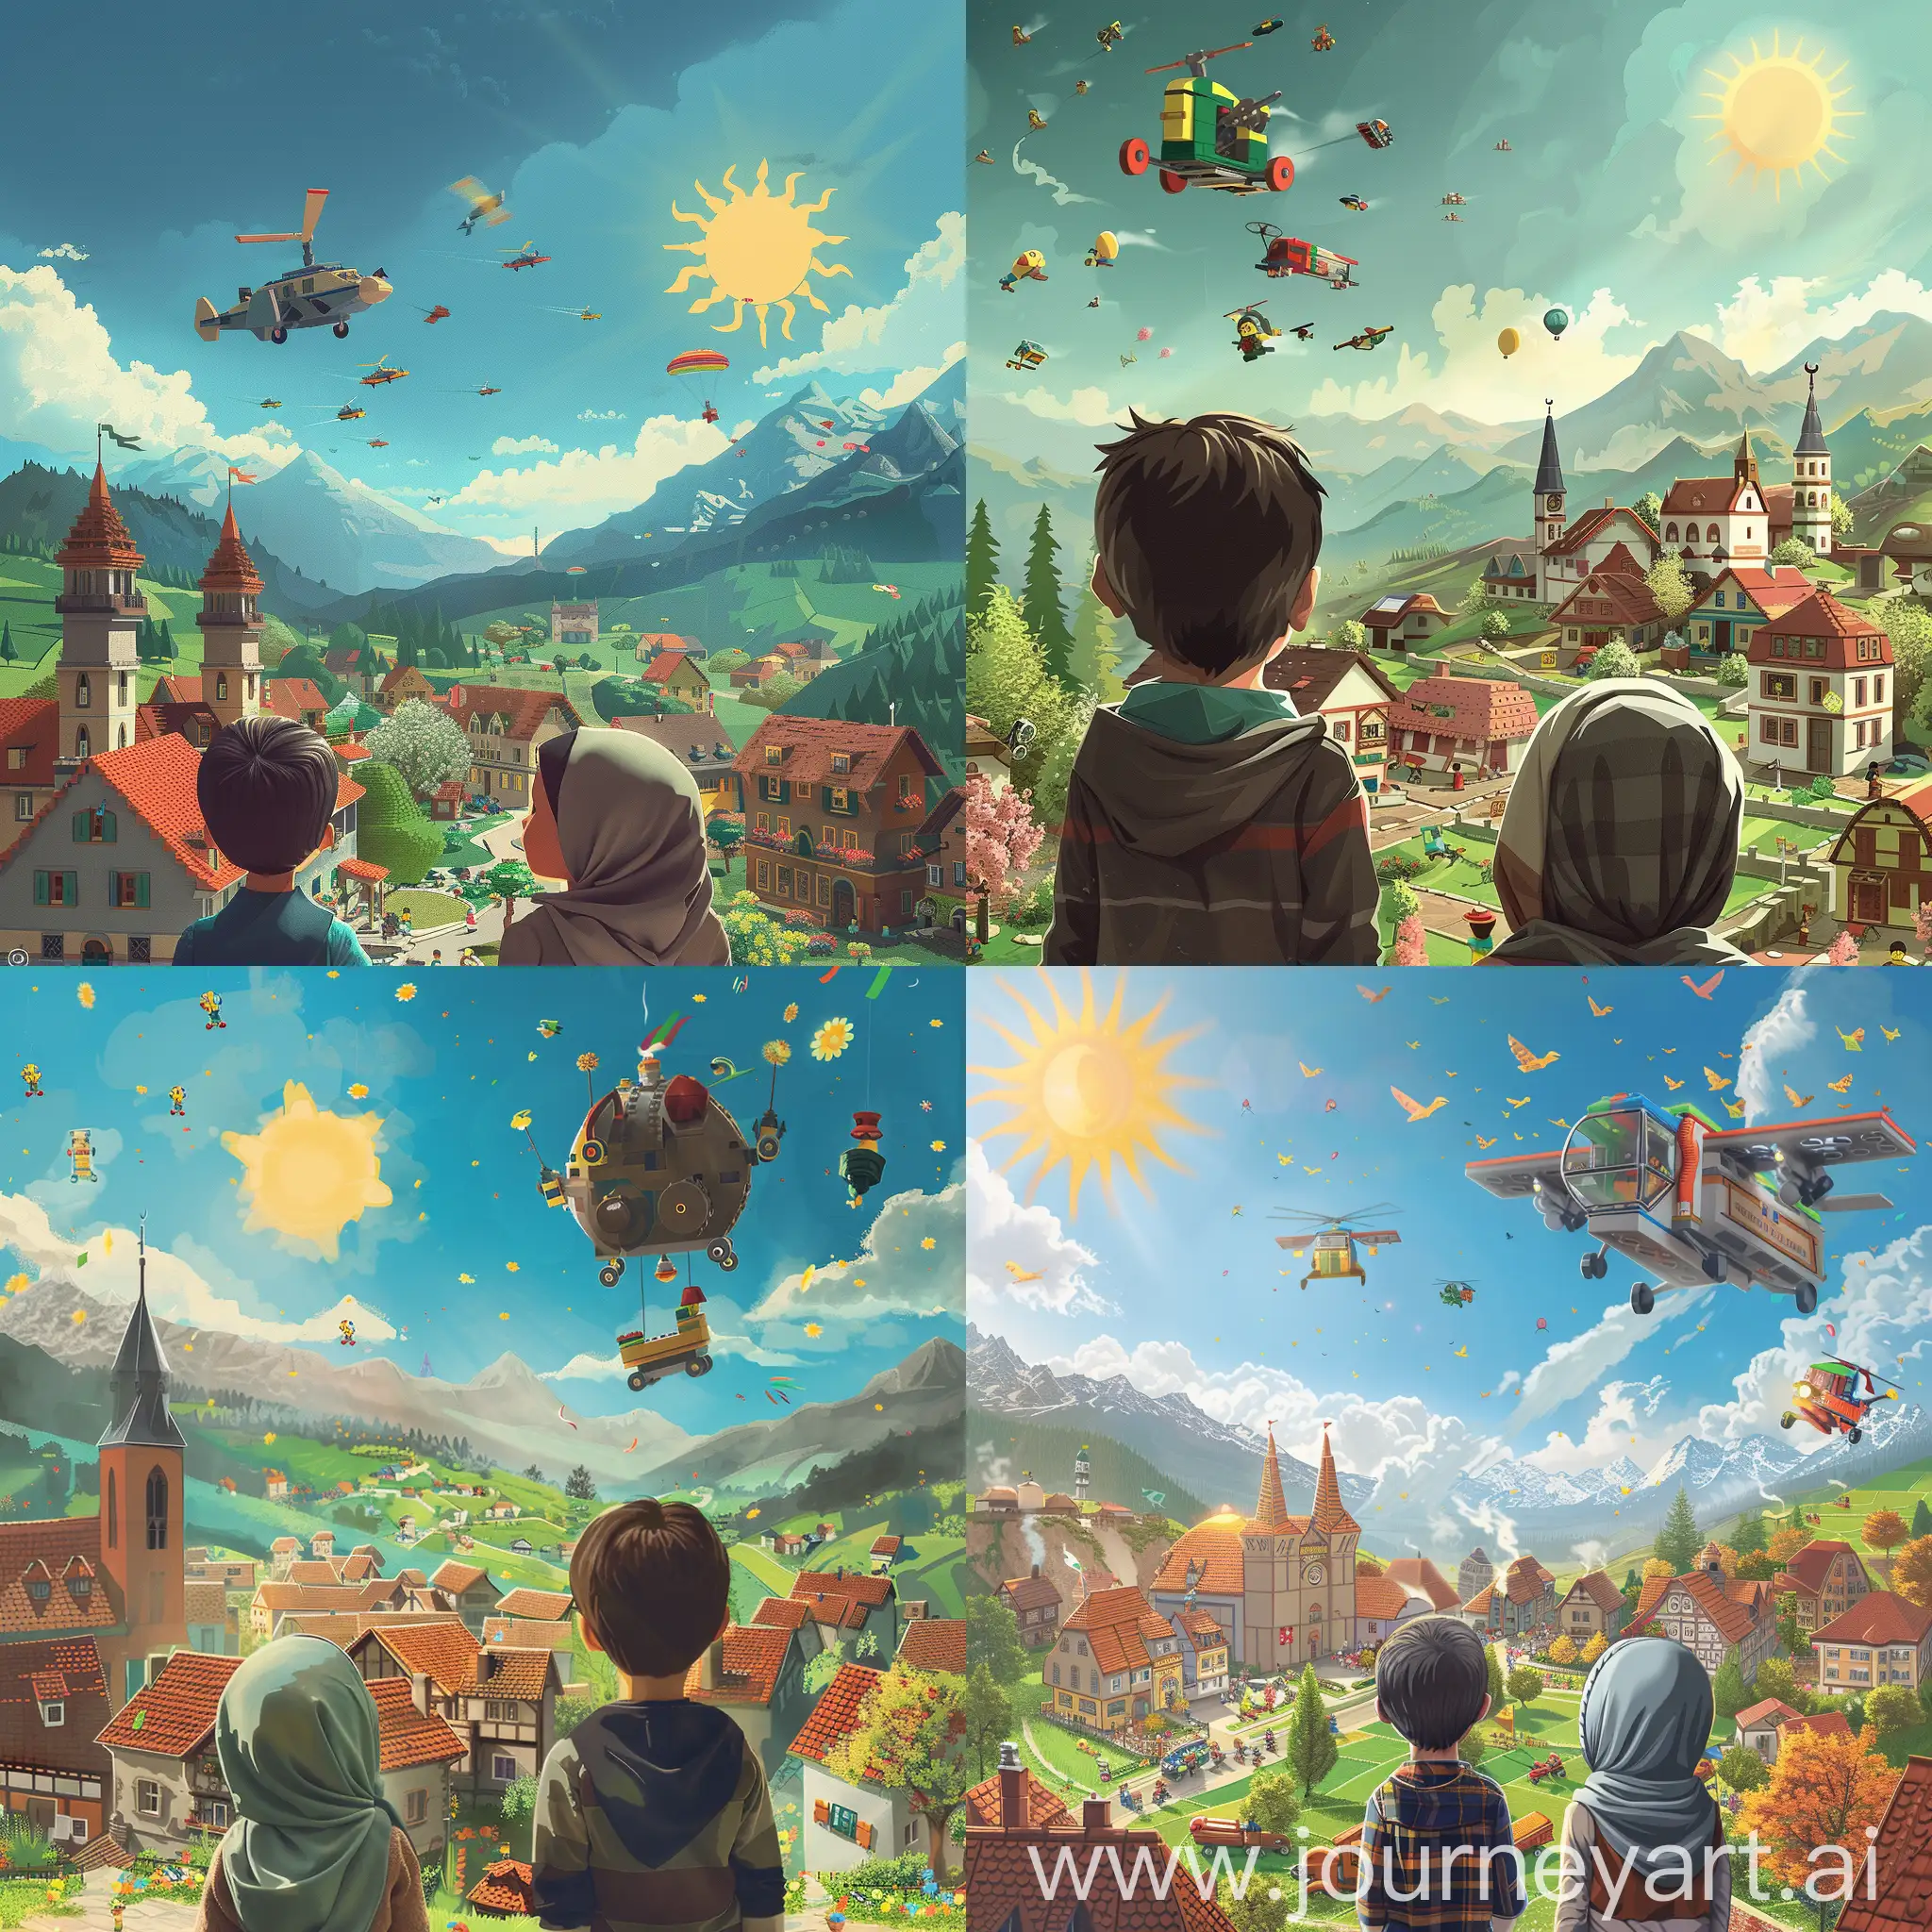 A boy and a girl in a hijab looking at a town with lego houses and toys houses , and in the distance mountains and sun and green elements of spring. There are no tall buildings or towers in the picture. Toys are flying in the sky , digital art